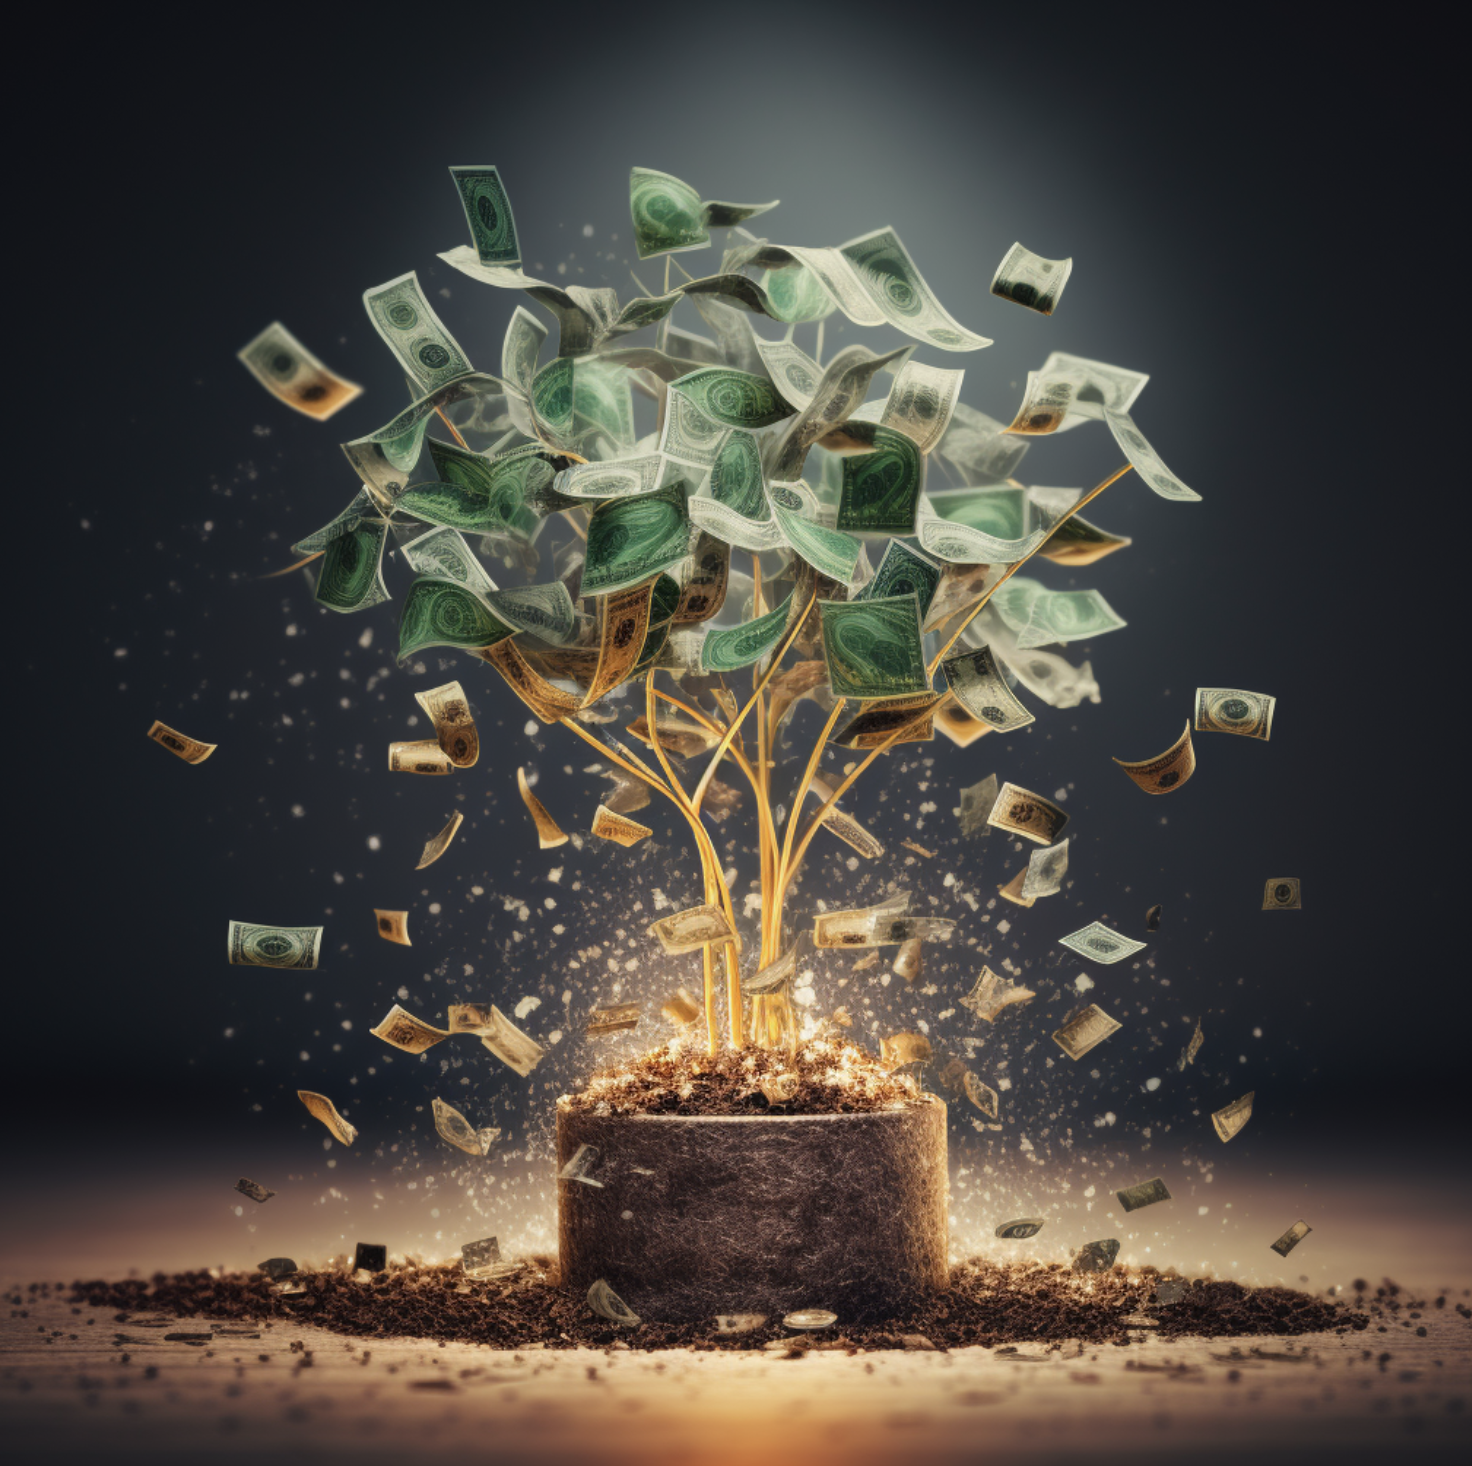 A digital illustration of a tree with banknotes for leaves, growing in a pot with coins and notes sprouting from the soil, against a dark background with scattered bills floating away.